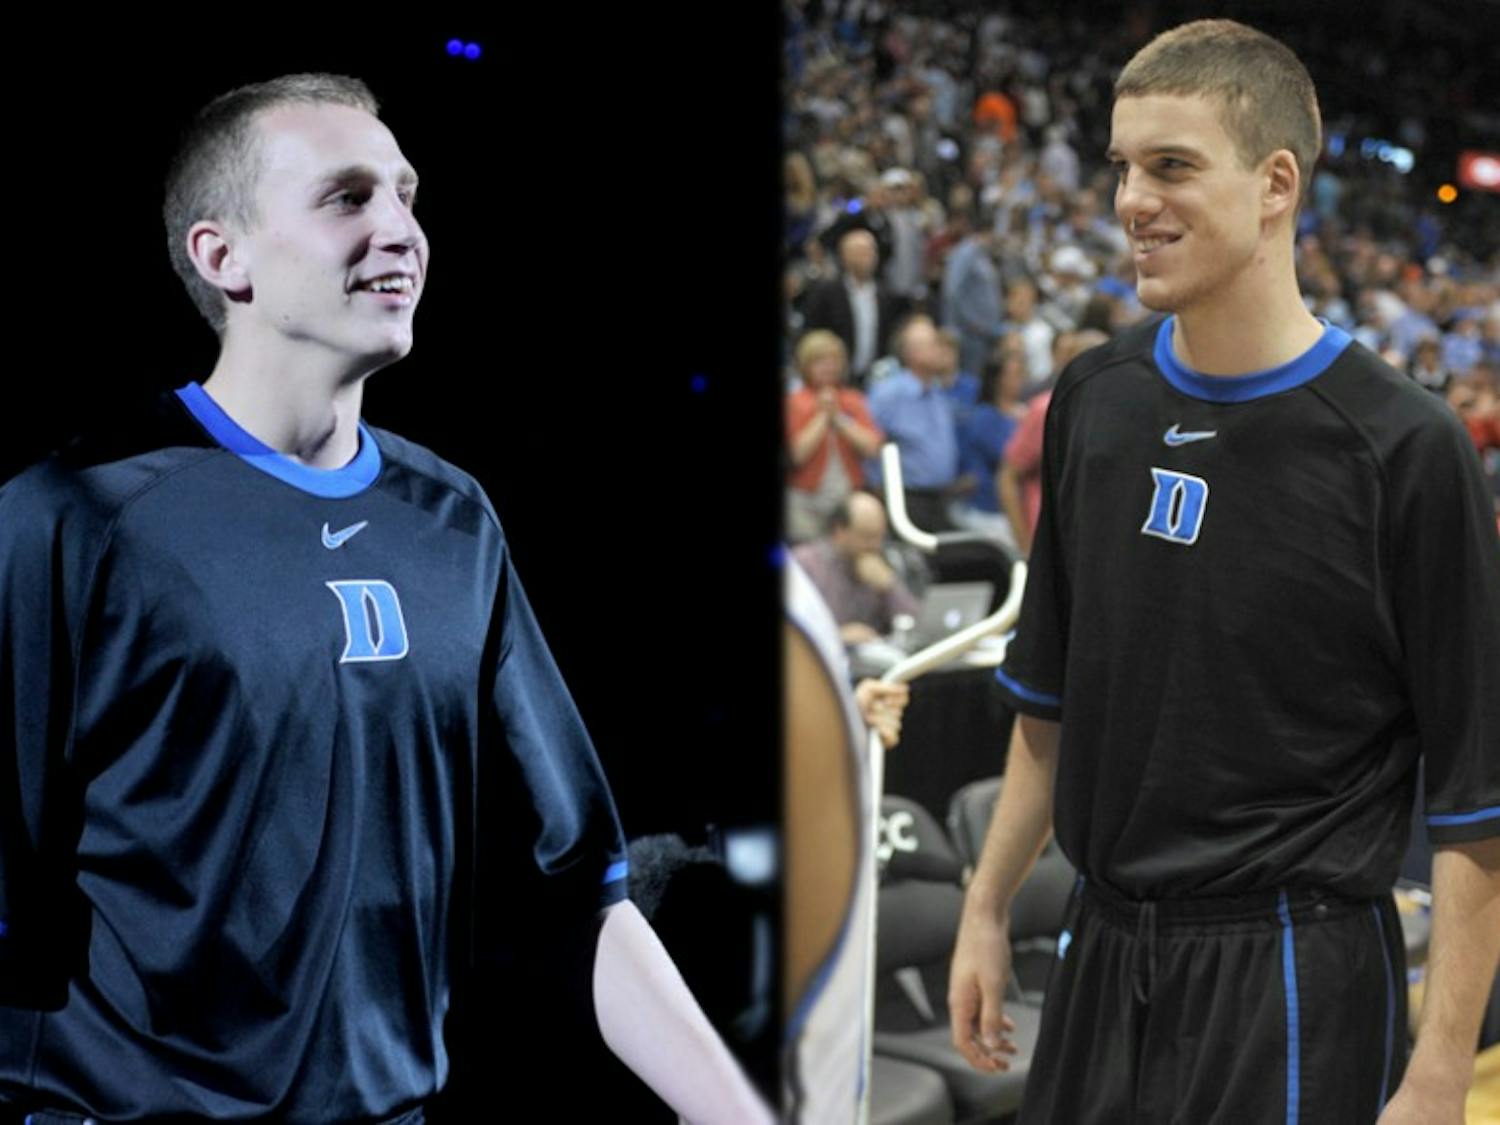 Alex Murphy and Marshall Plumlee have made the most of their redshirt seasons.